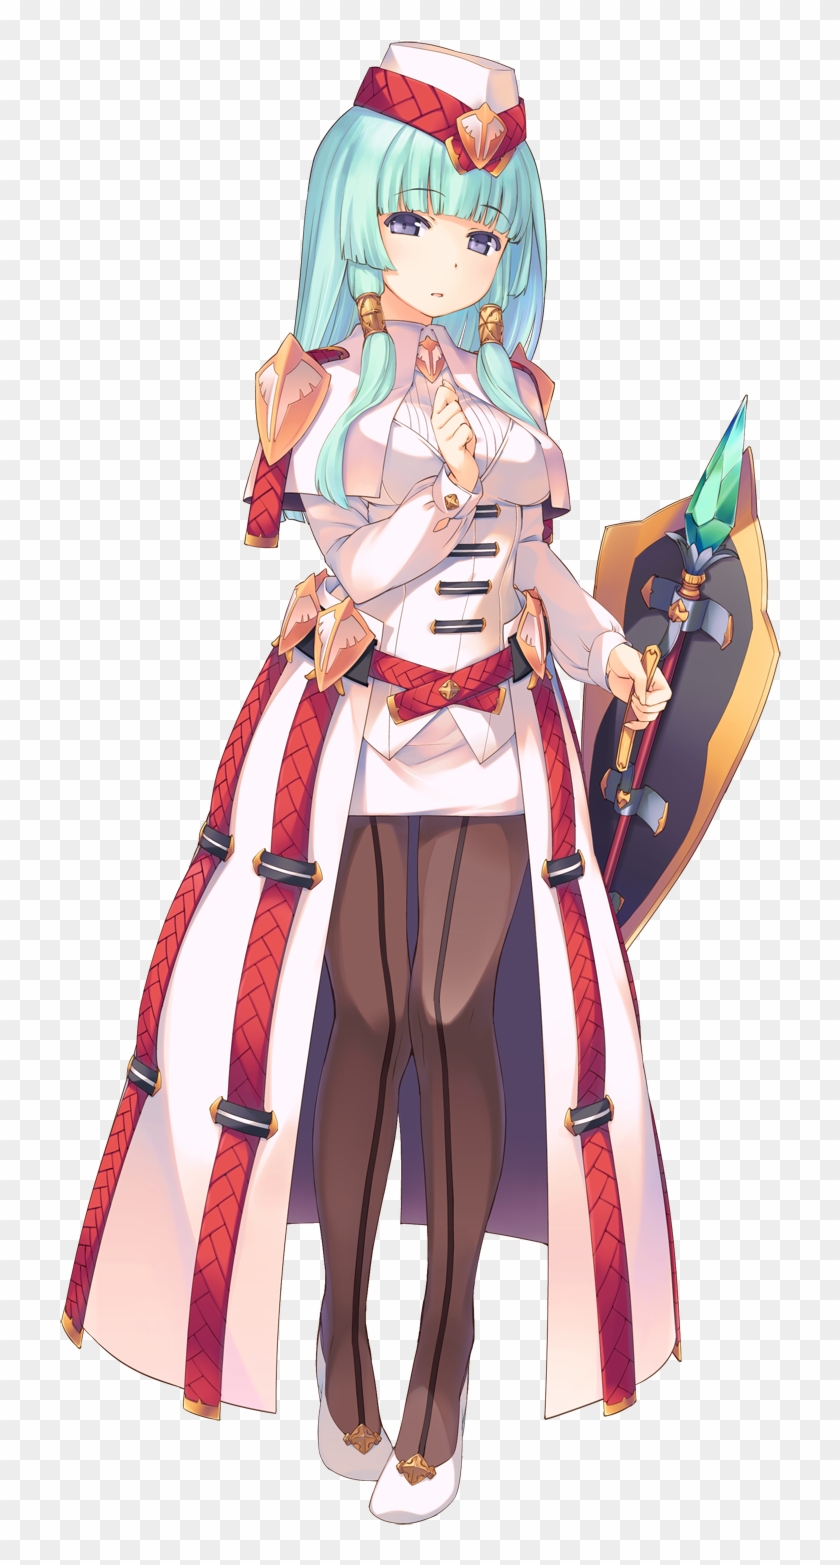 Click For Full Sized Image Fiora Marsh - Dungeon Travelers 2 Character Portrait Clipart #5770300